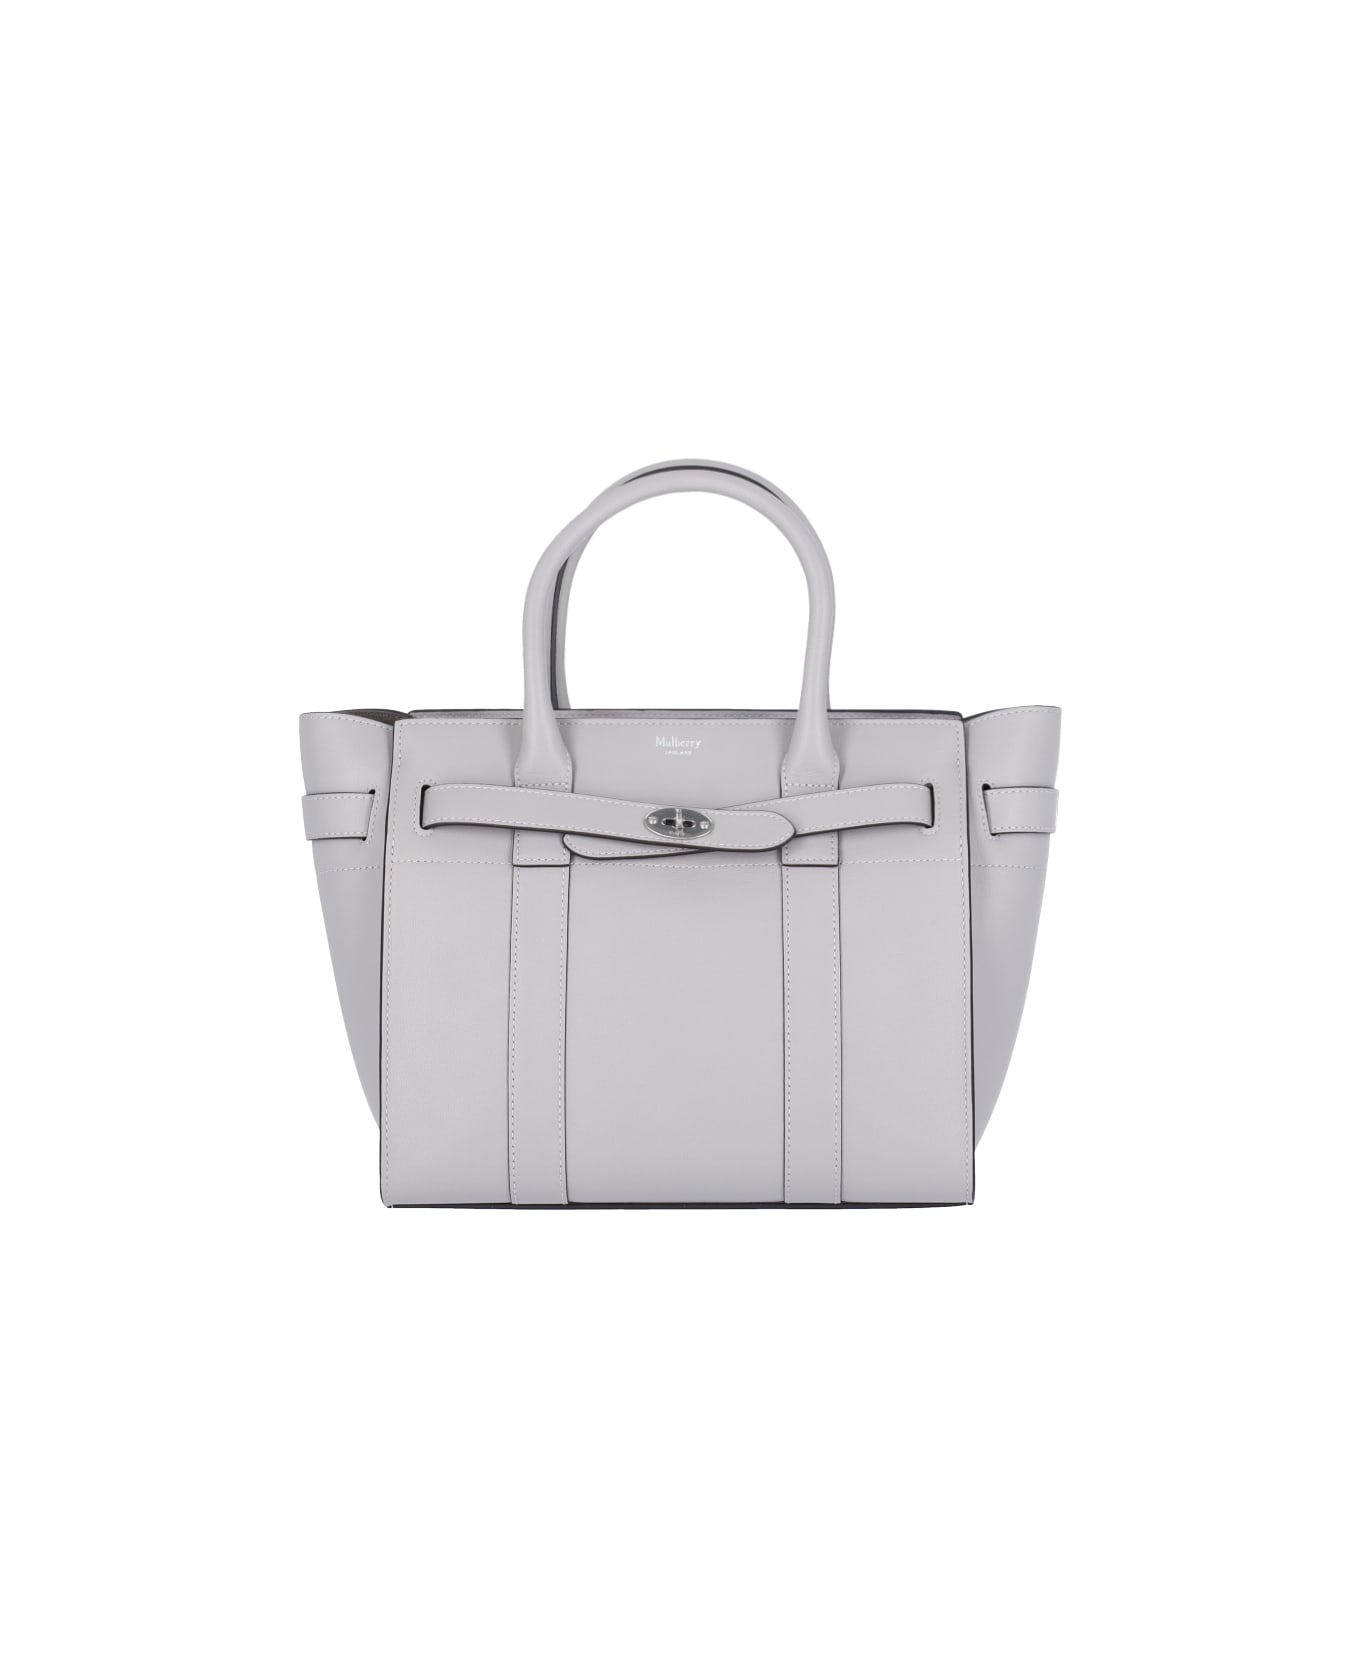 Mulberry 'bayswater' Small Shoulder Bag - Grey